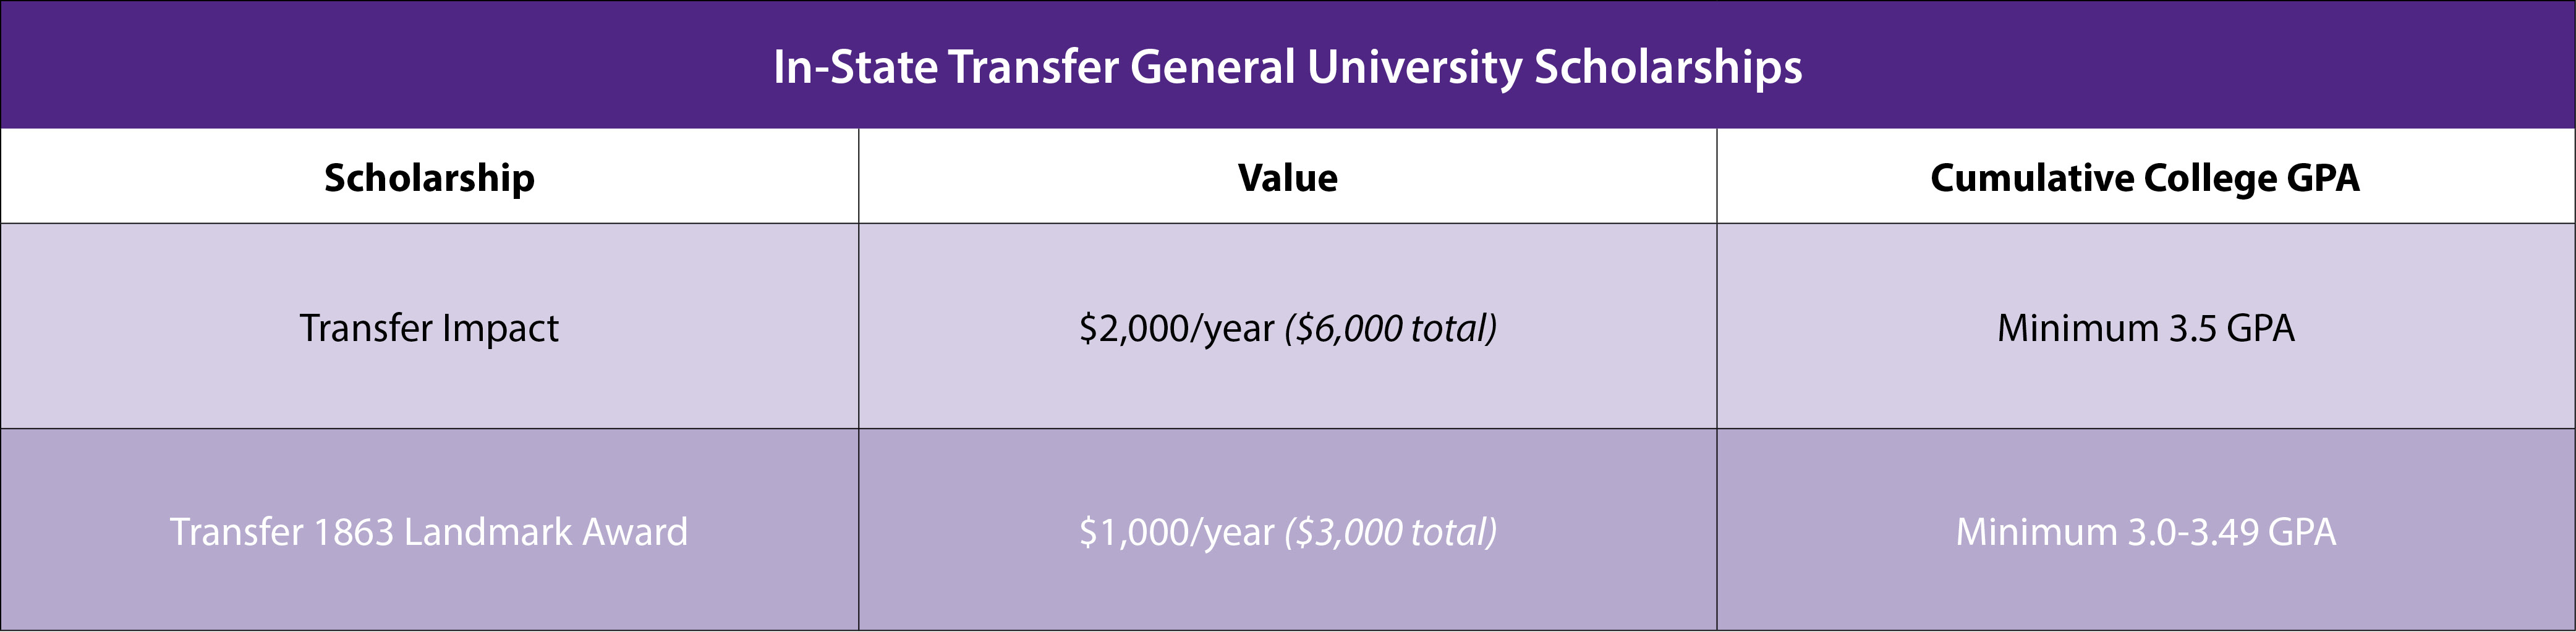 In-State Transfer Scholarships. College GPA of 3.5 or more is eligible for a Transfer Impact scholarship for $2,000 a year ($6,000 total). A cumulative college GPA of 3-3.49 is eligible for the Transfer 1863 Landmark Award for $1,000 a year ($3,000 total)